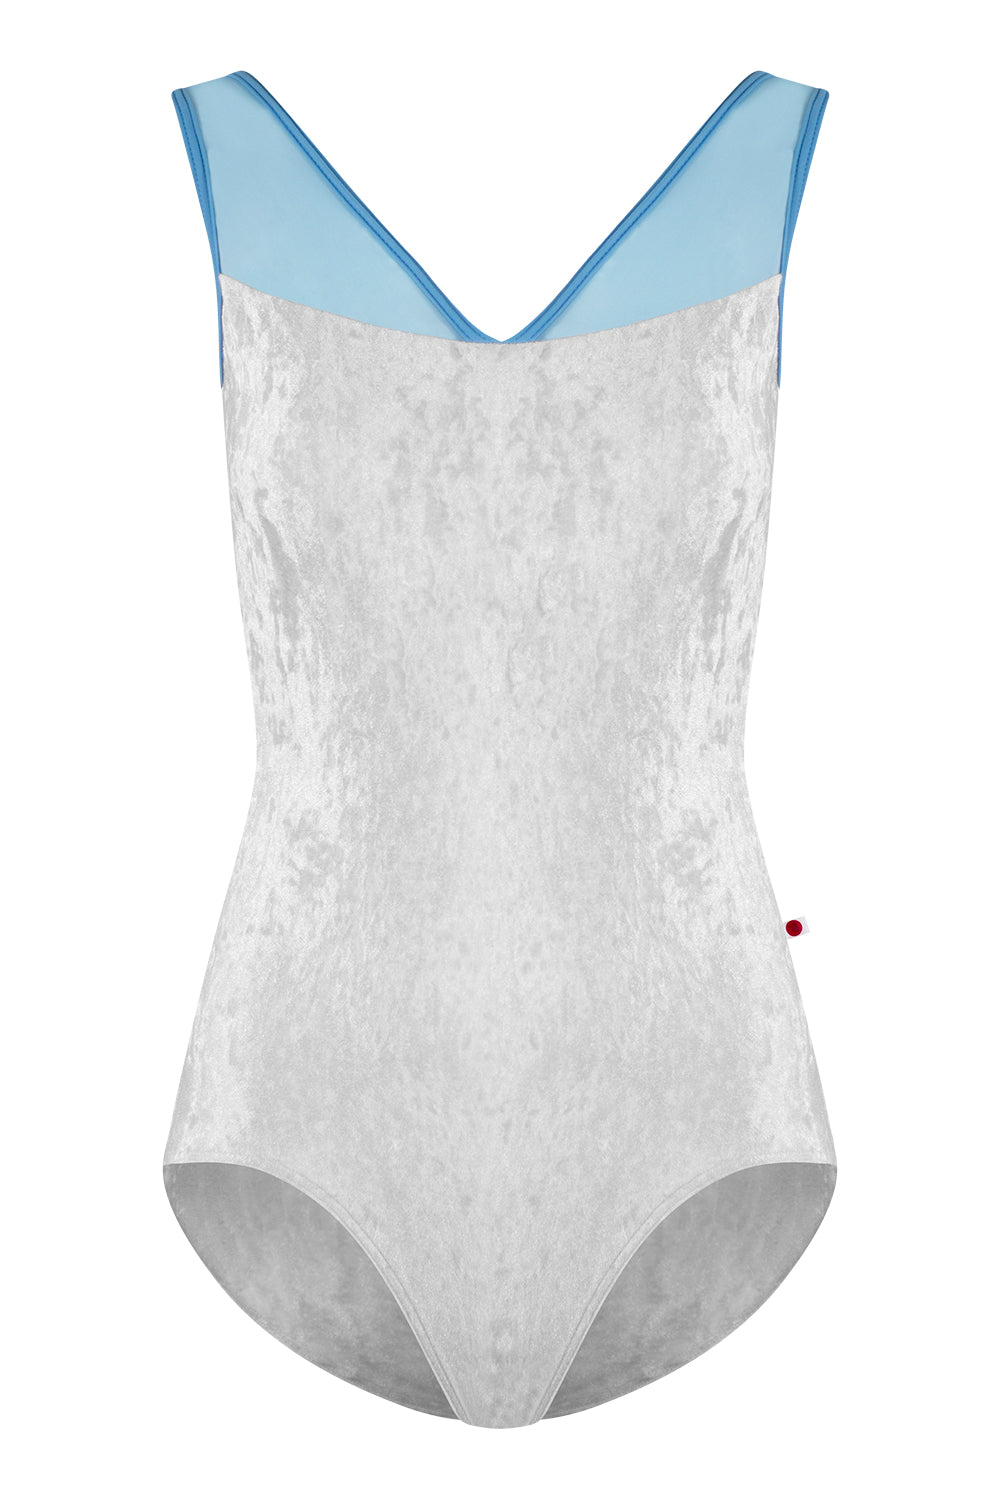 Masha leotard in CV-Silver body color with Mesh Glacier top color and T-Bluebell trim color